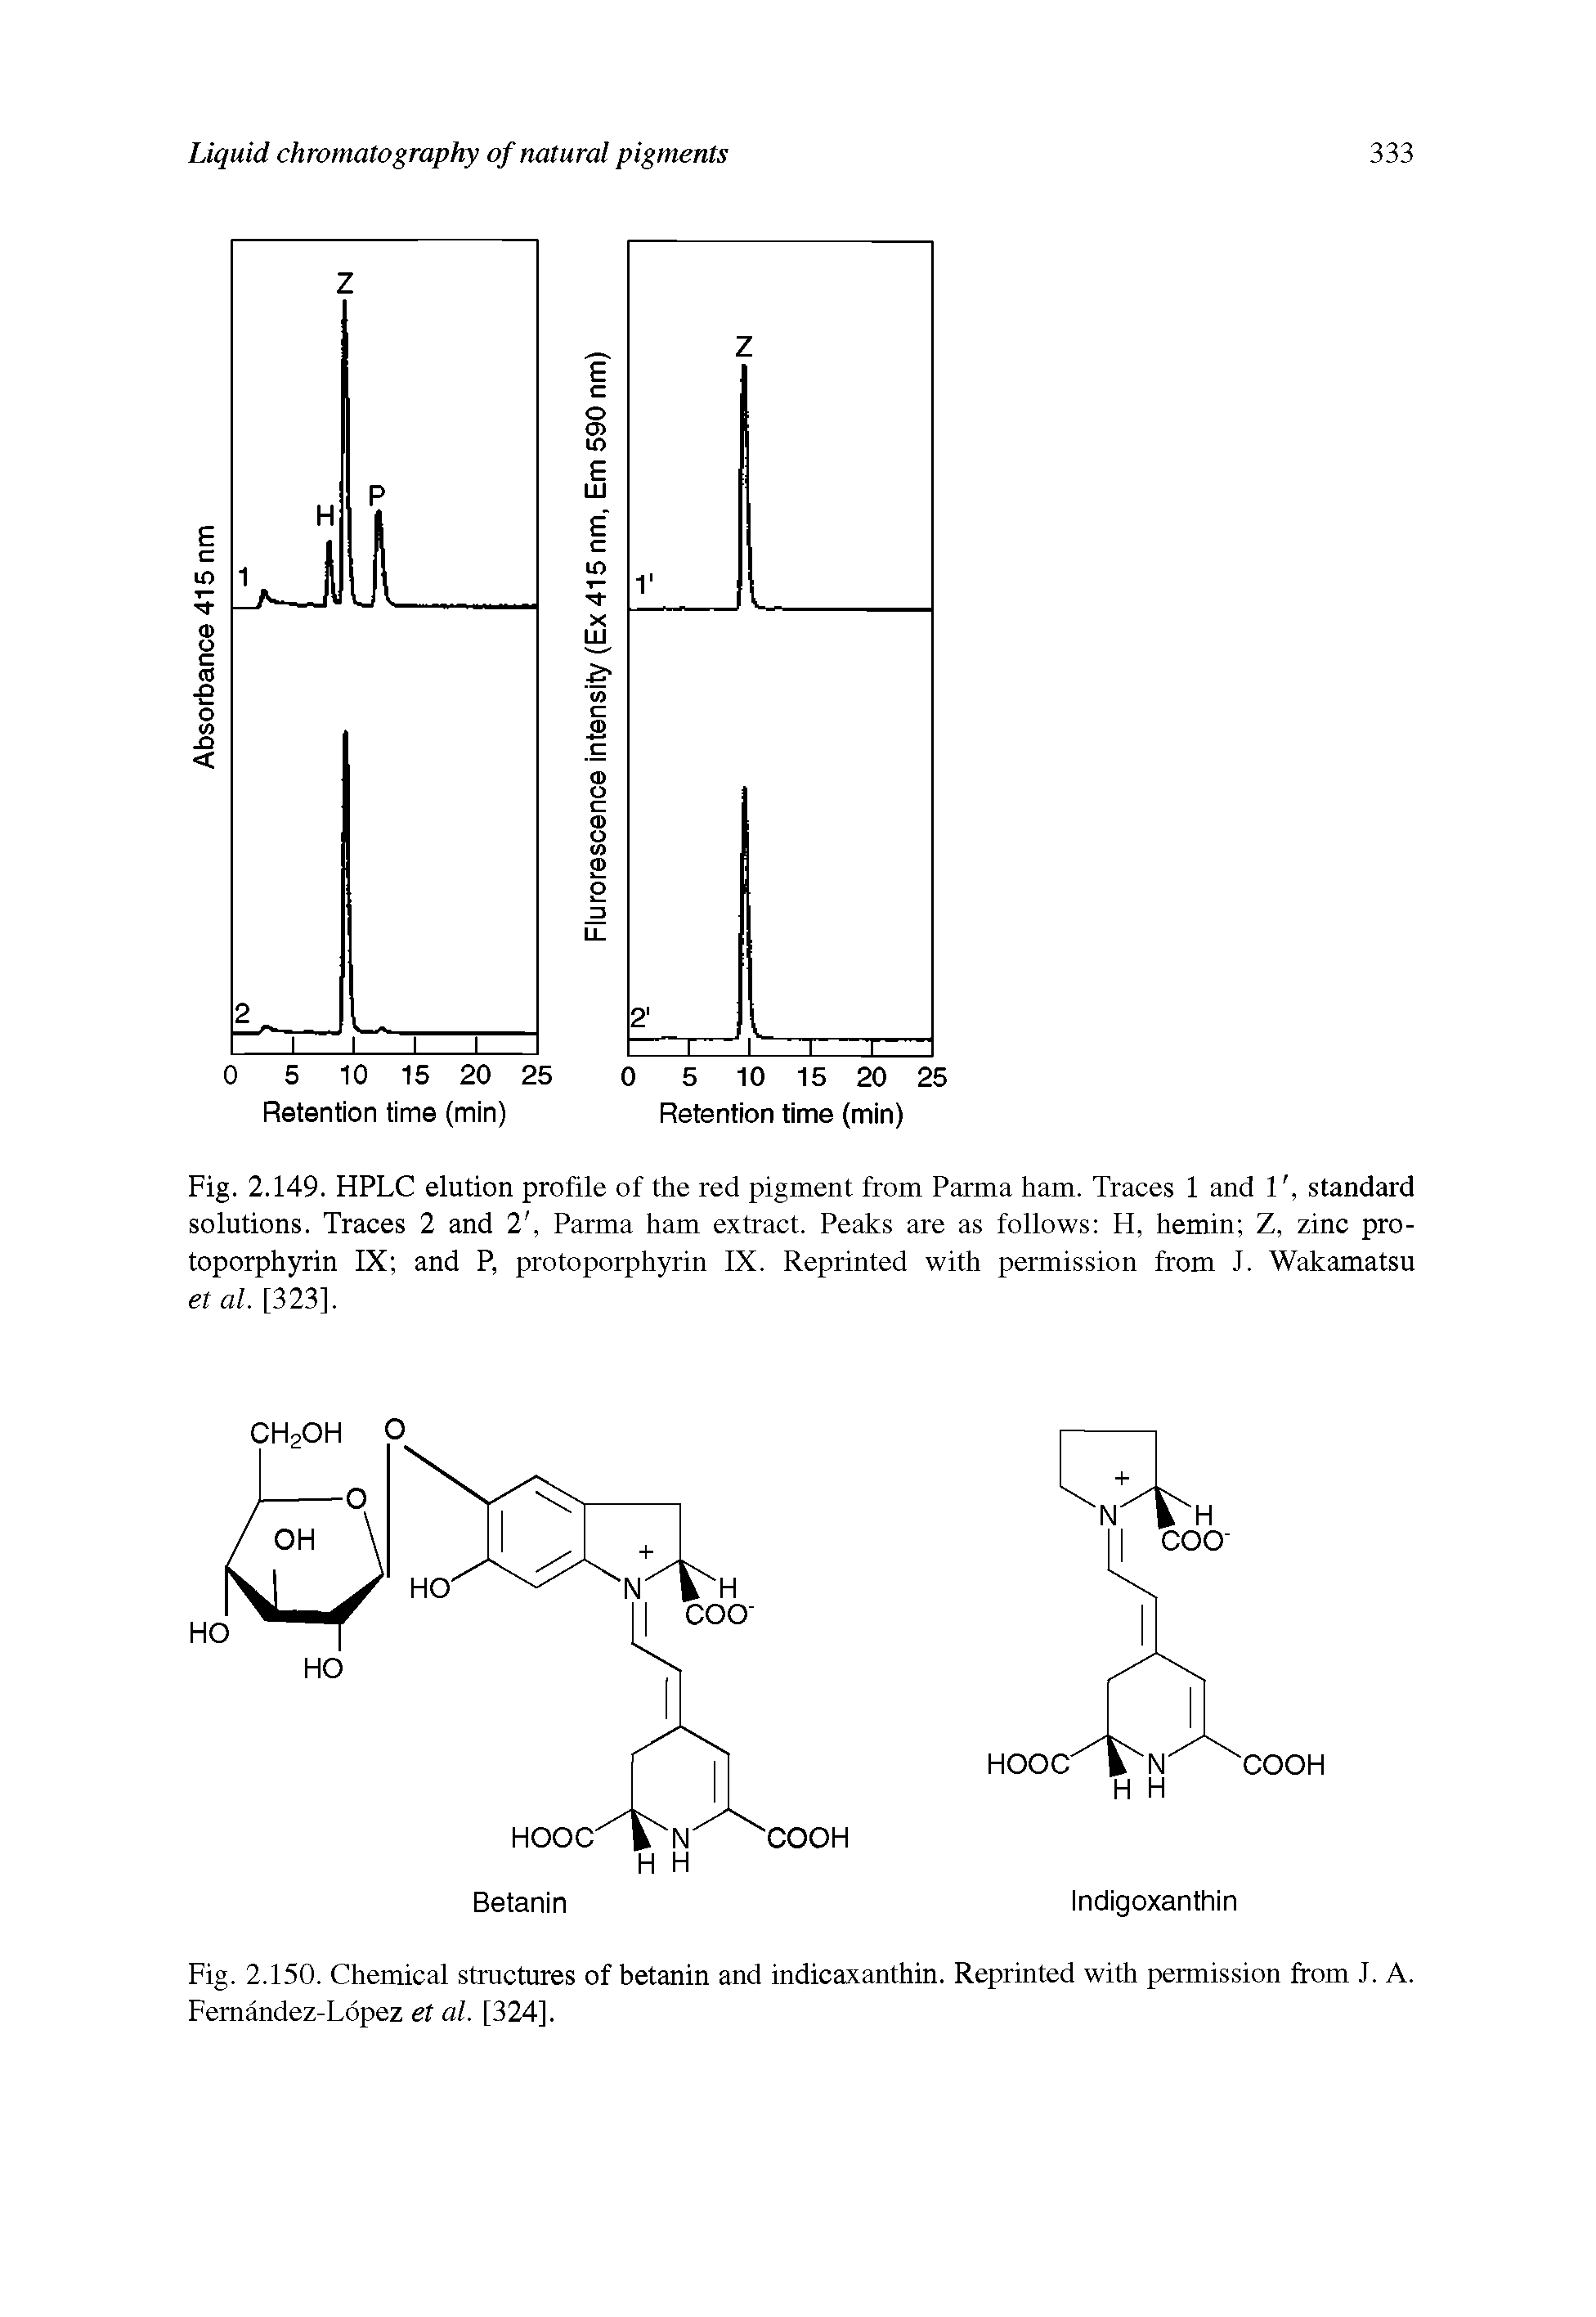 Fig. 2.149. HPLC elution profile of the red pigment from Parma ham. Traces 1 and l, standard solutions. Traces 2 and 2, Parma ham extract. Peaks are as follows H, hemin Z, zinc protoporphyrin IX and P, protoporphyrin IX. Reprinted with permission from J. Wakamatsu et al. [323].